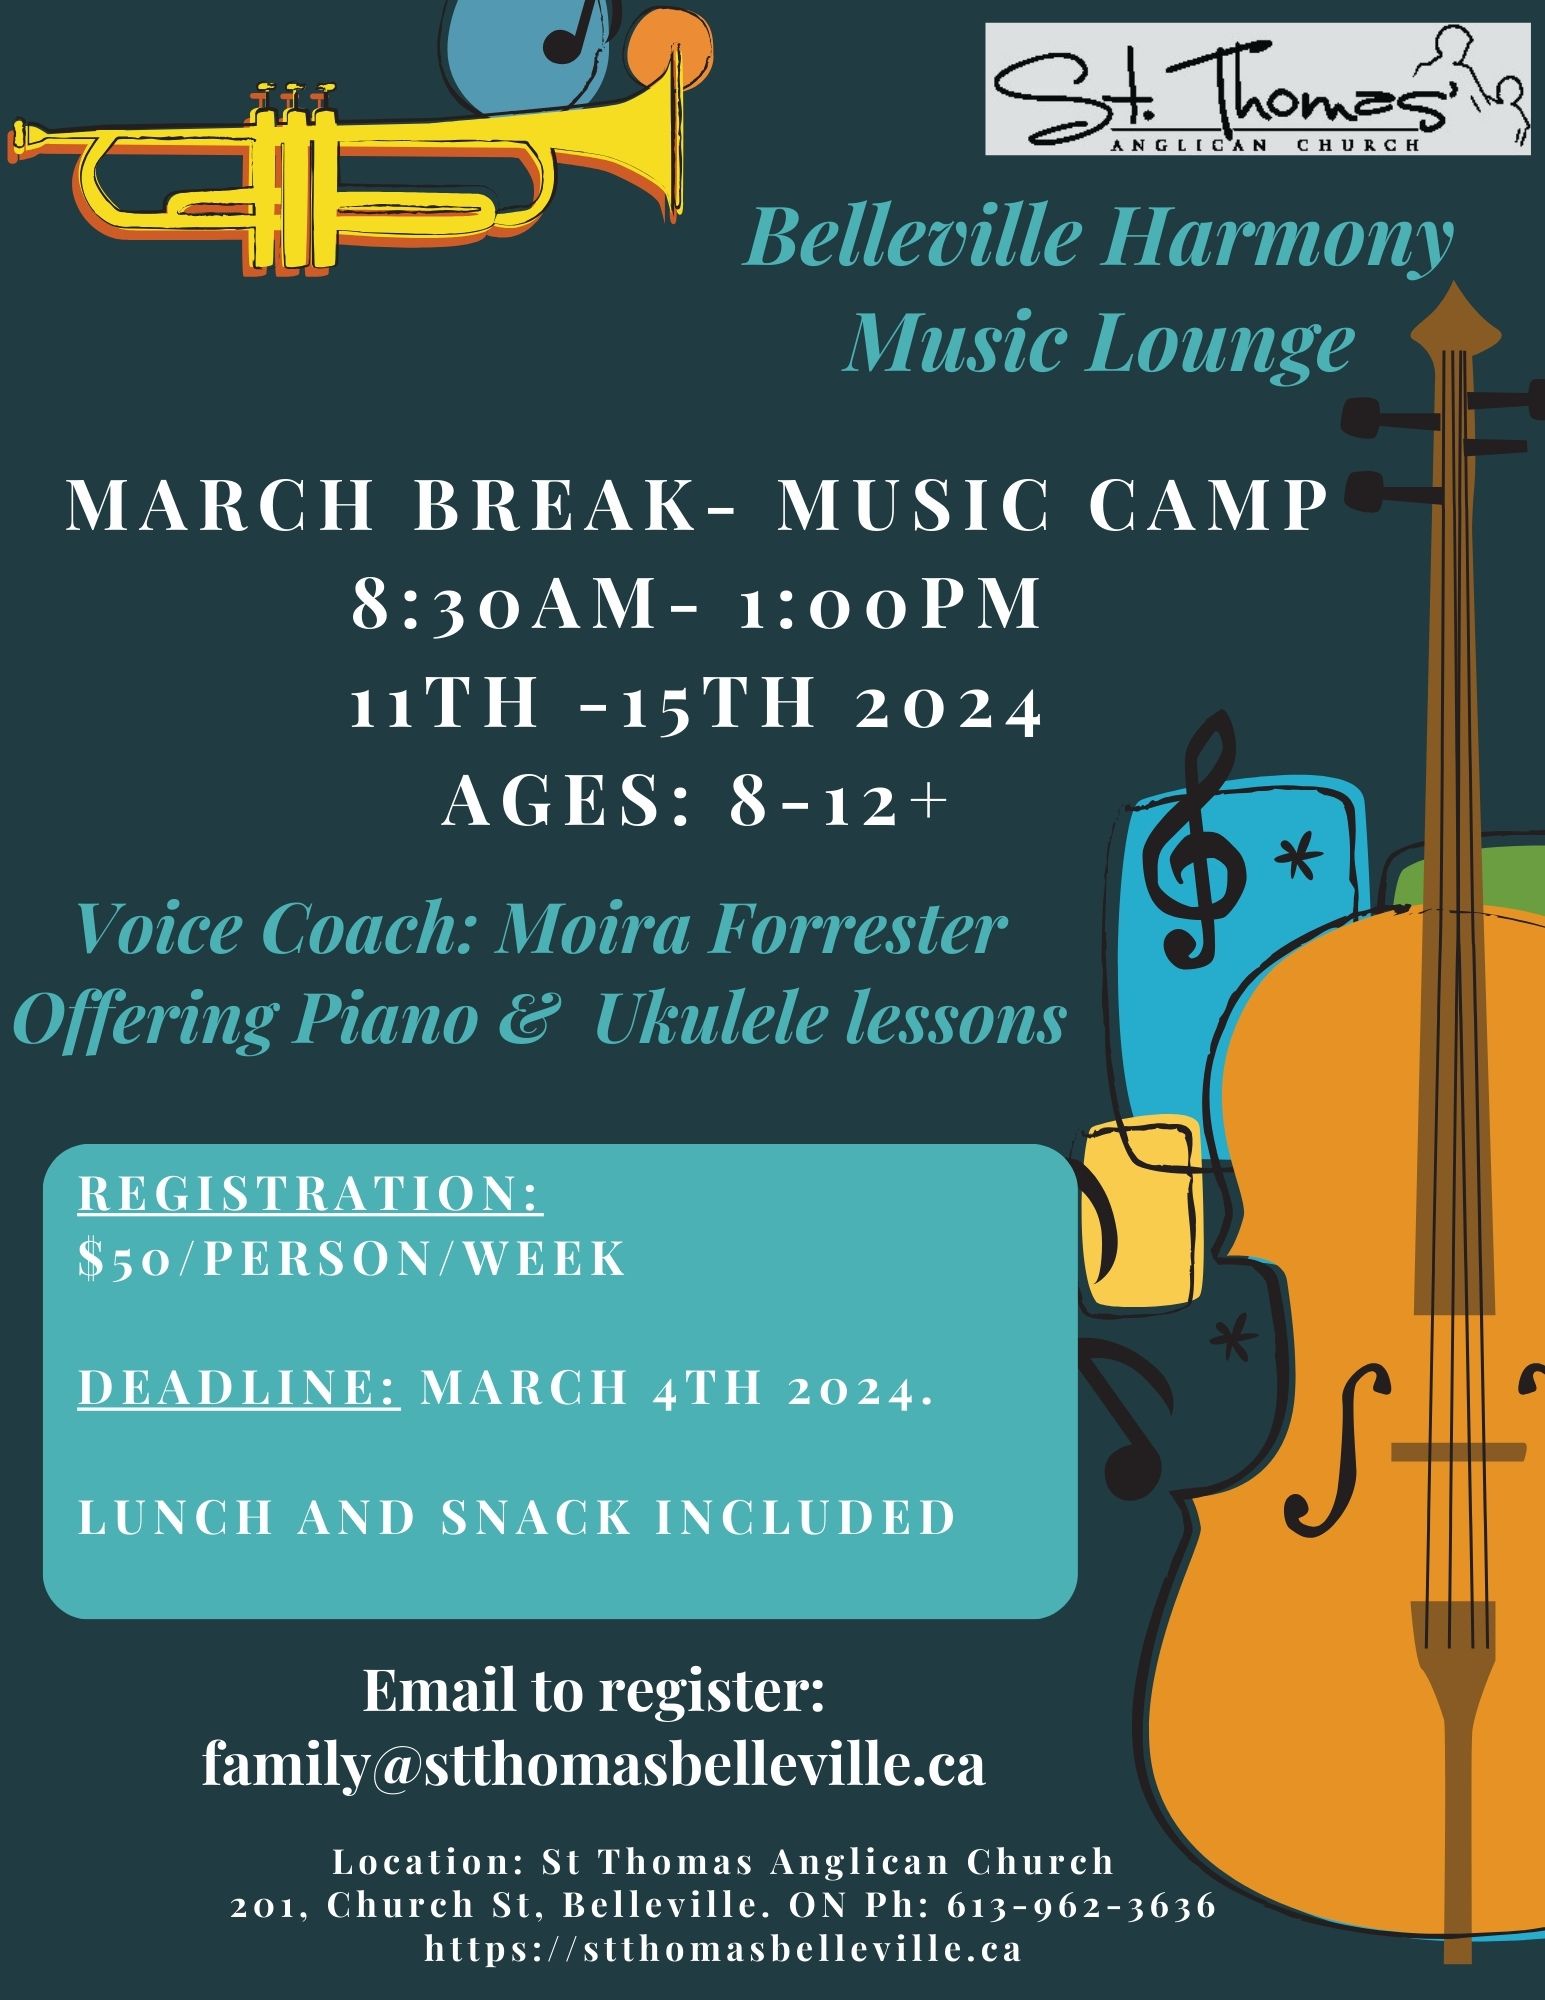 Poster with event details and images of instruments